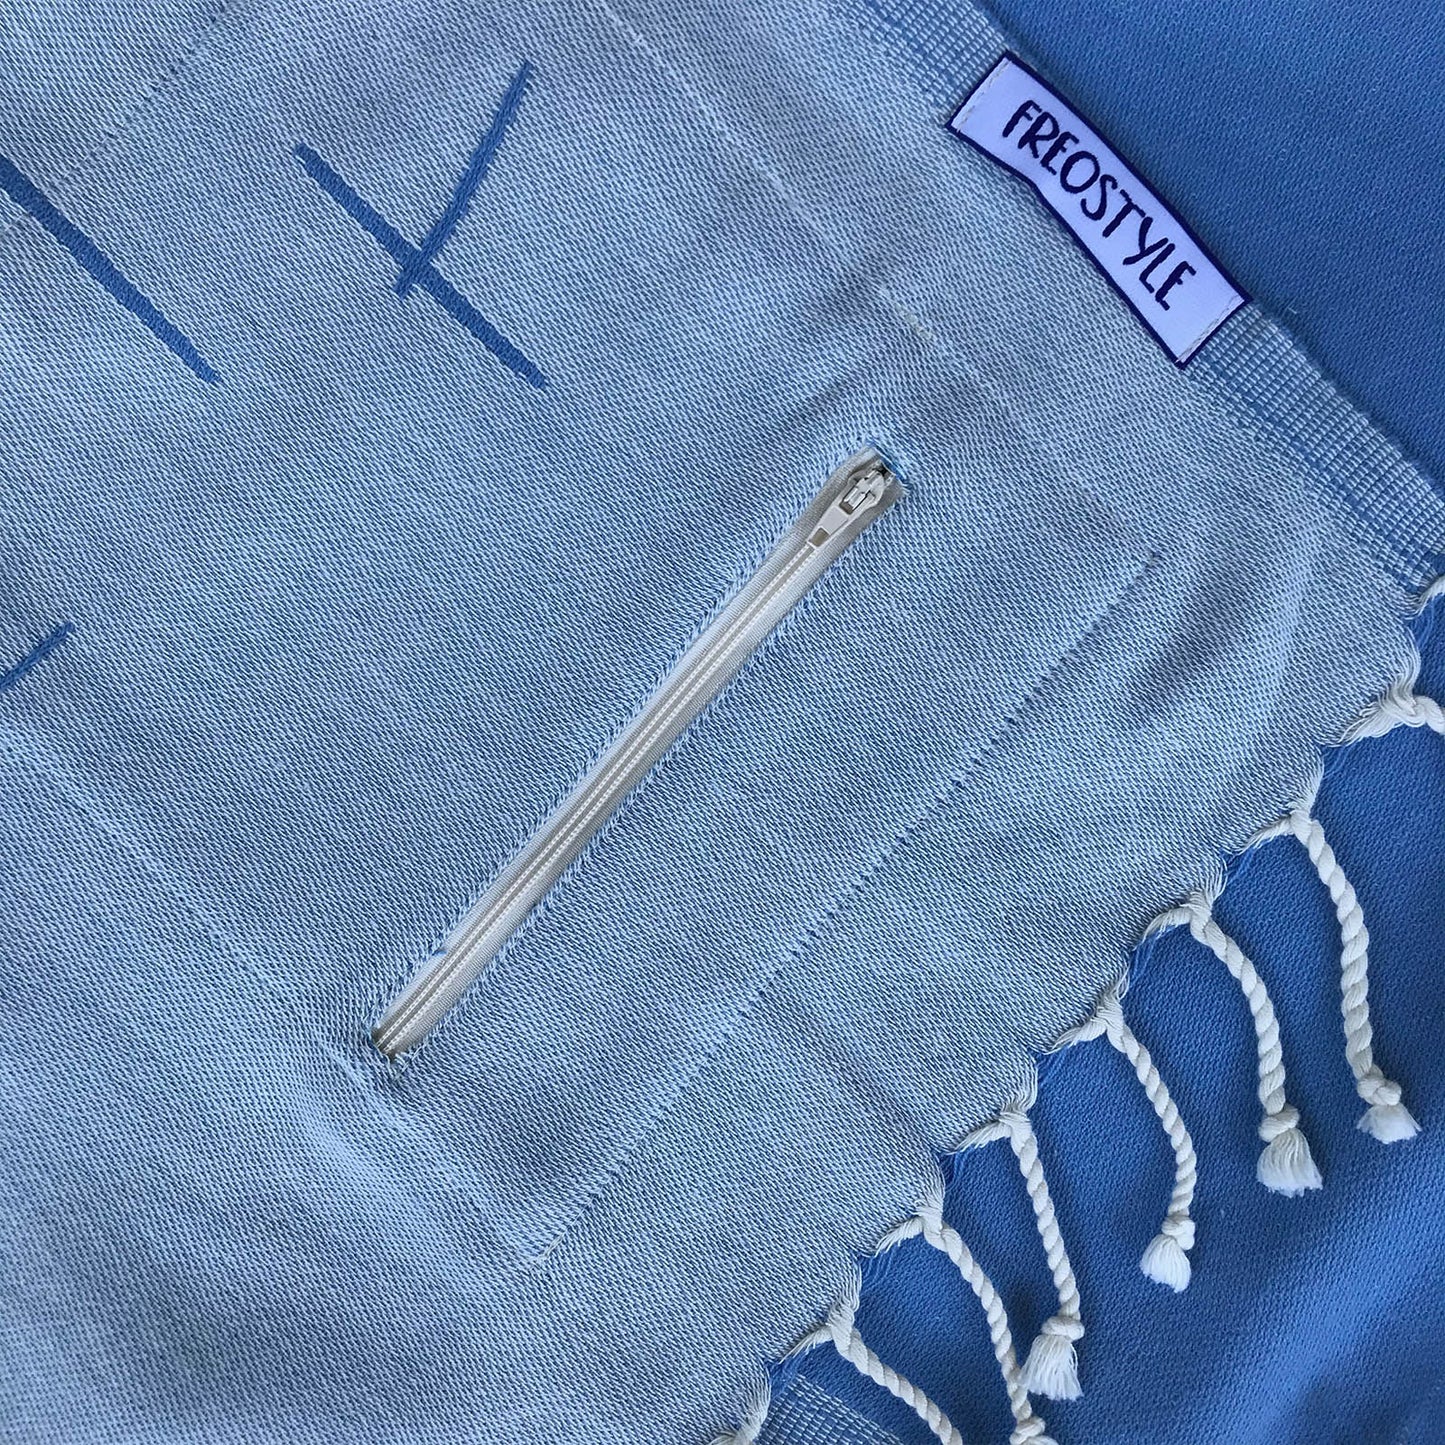 Freostyle Turkish Beach Towel with Pockets, Harbour, blue, close up of pocket